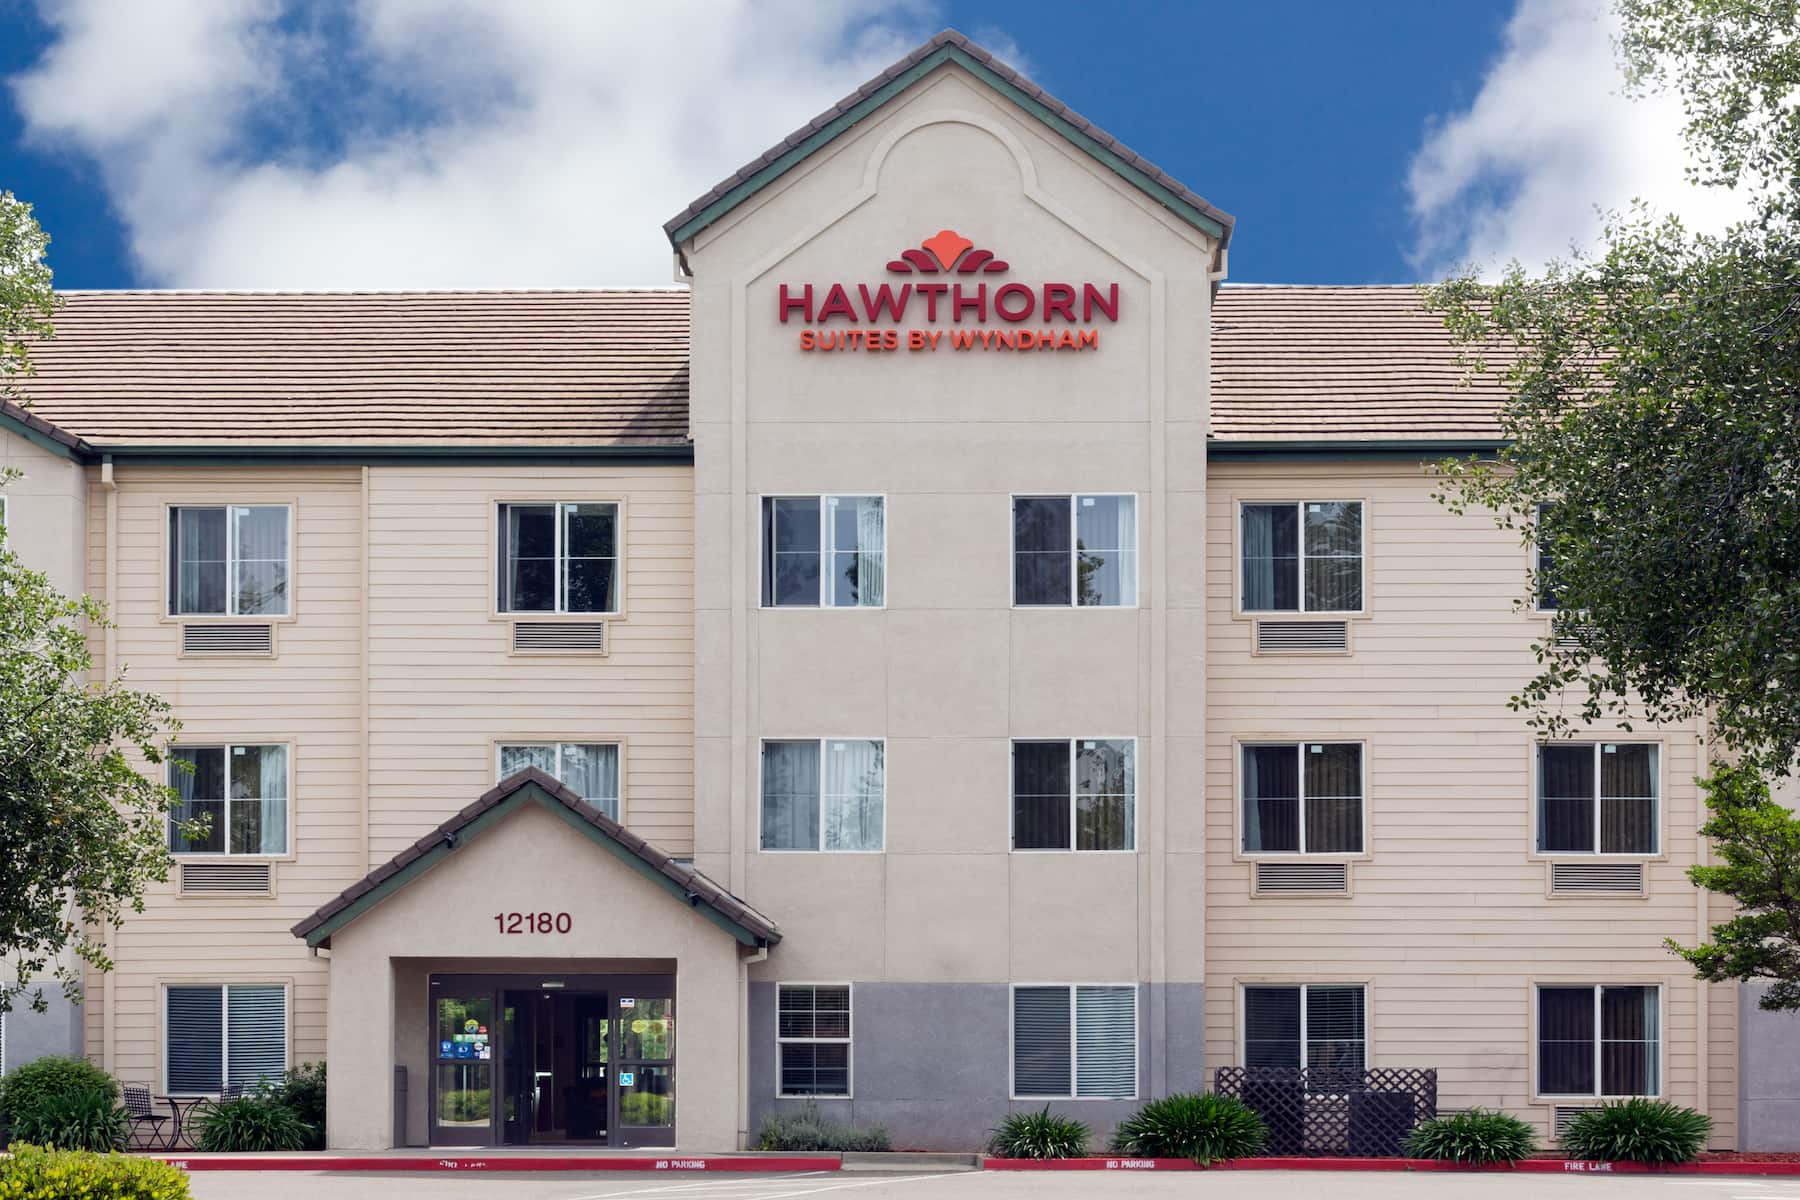 Exterior Day Image of Hawthorn Suites by Wyndham Rancho Cordova/Folsom hote...